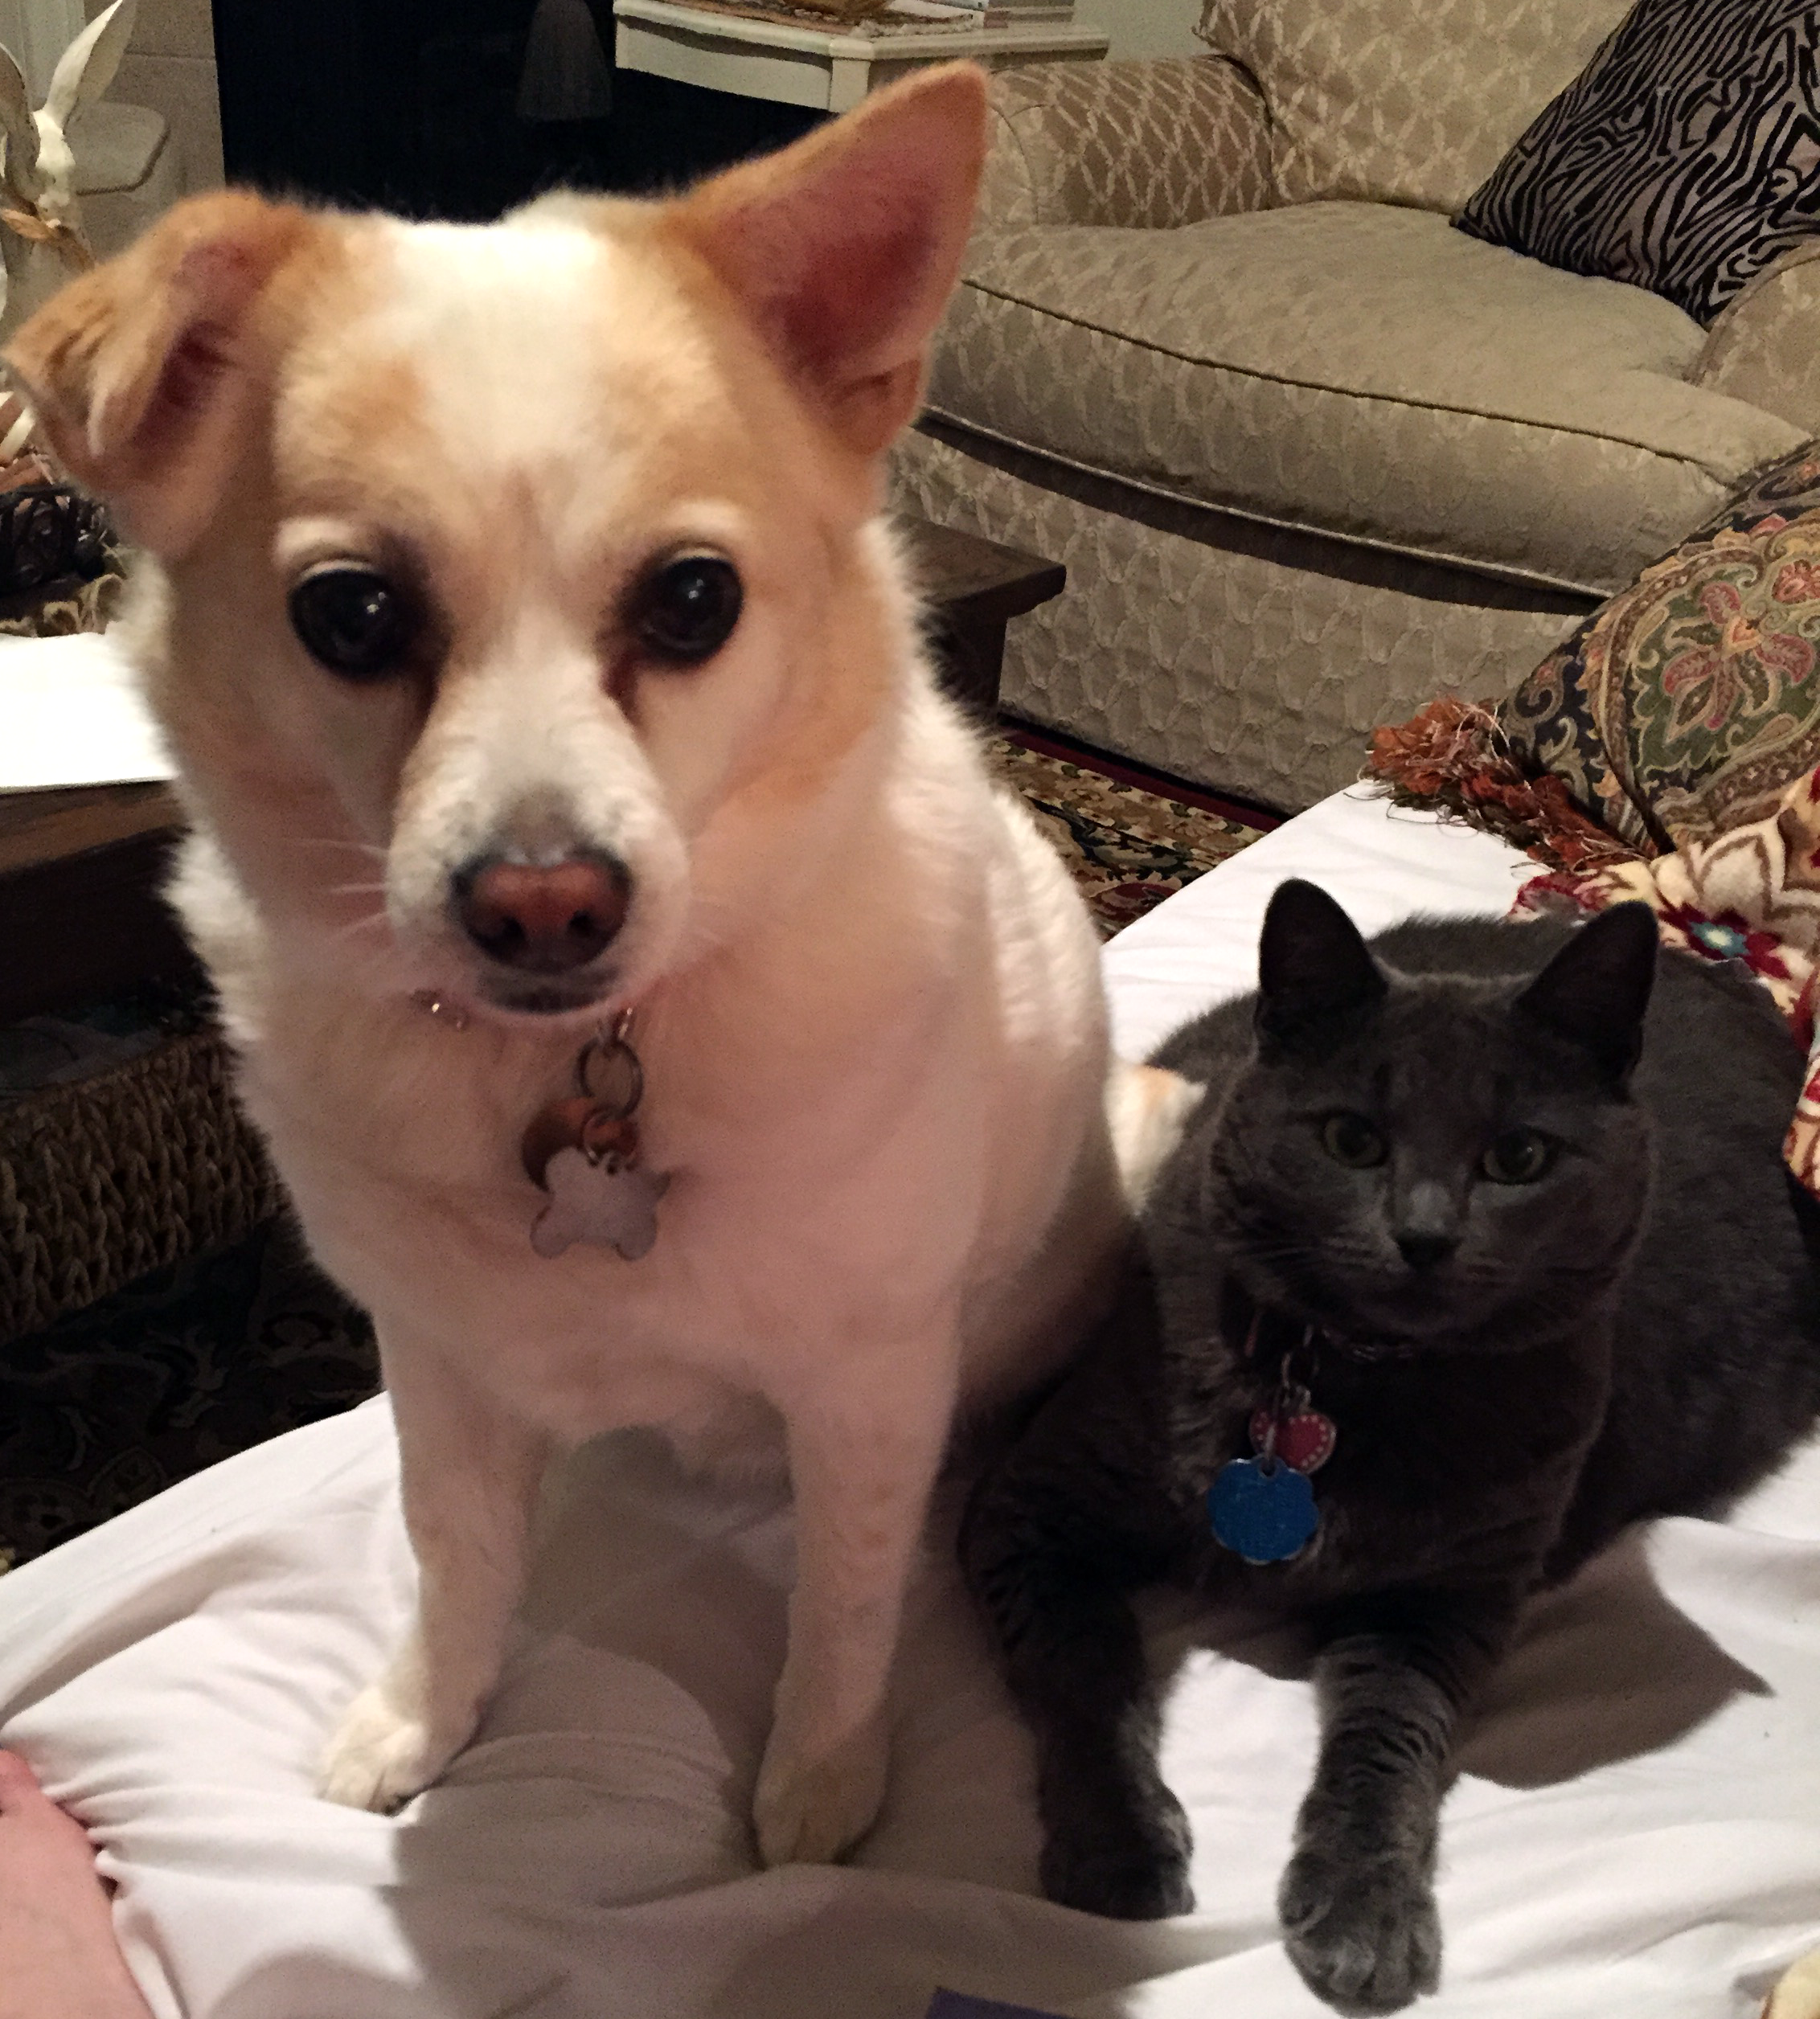 Photo: Dog and a cat sitting next to each other. Photo by The Signal reporter Shelby Starr.